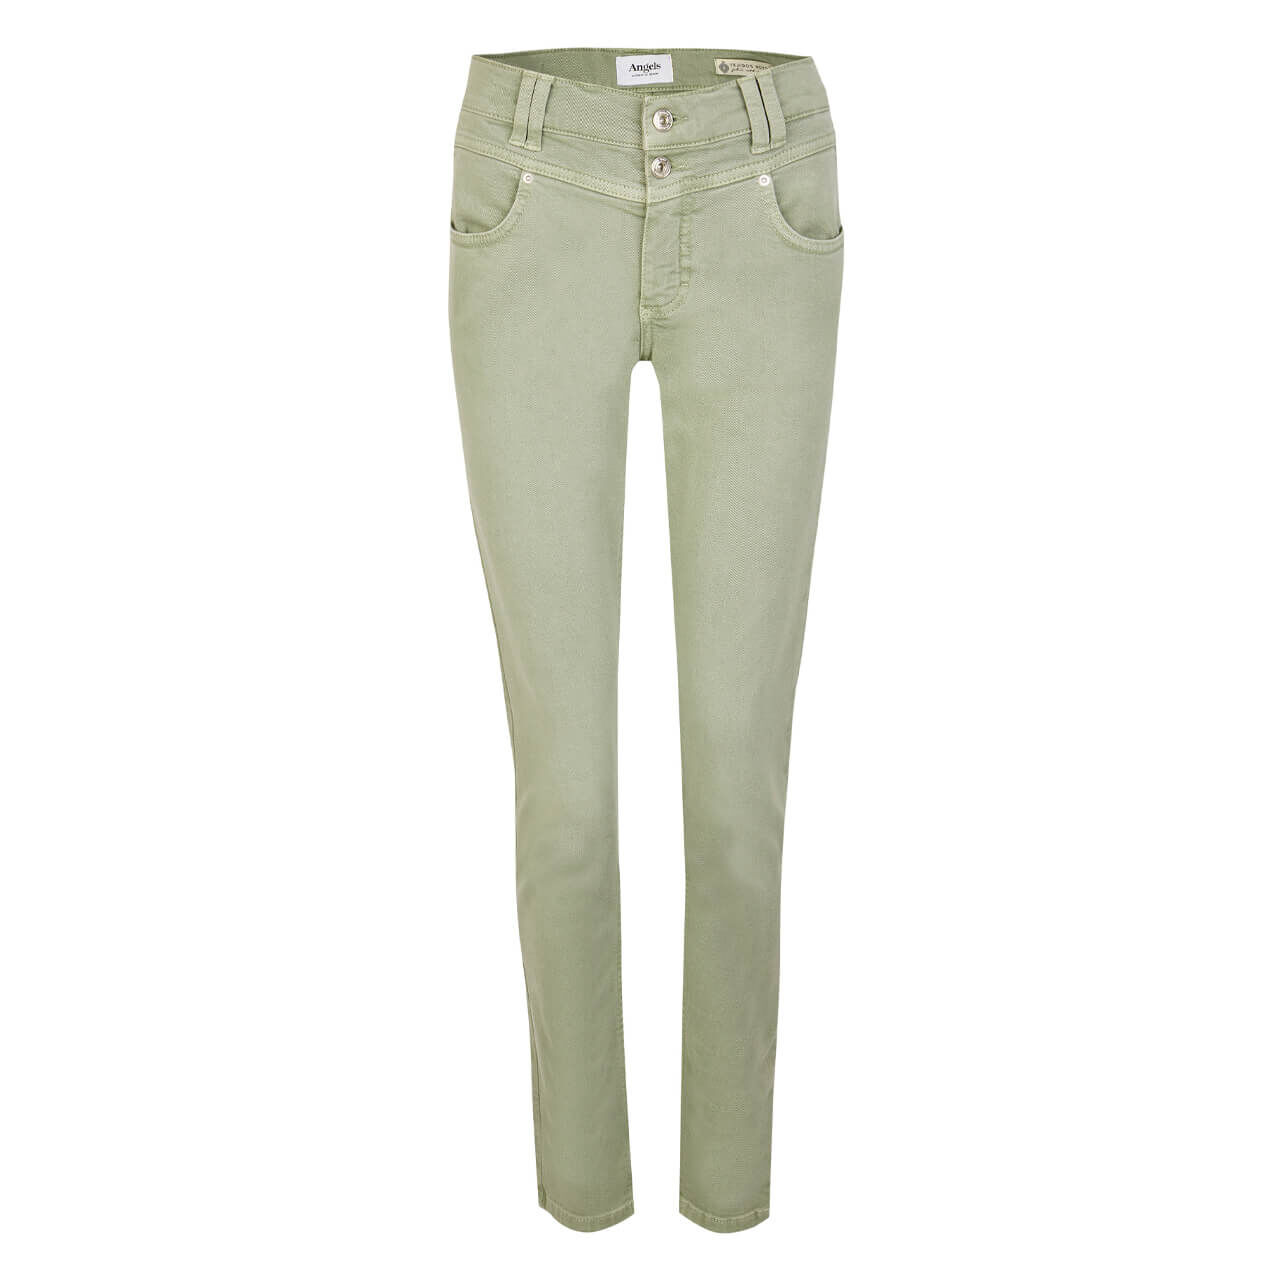 Angels Skinny Button Jeans eucalyptus used